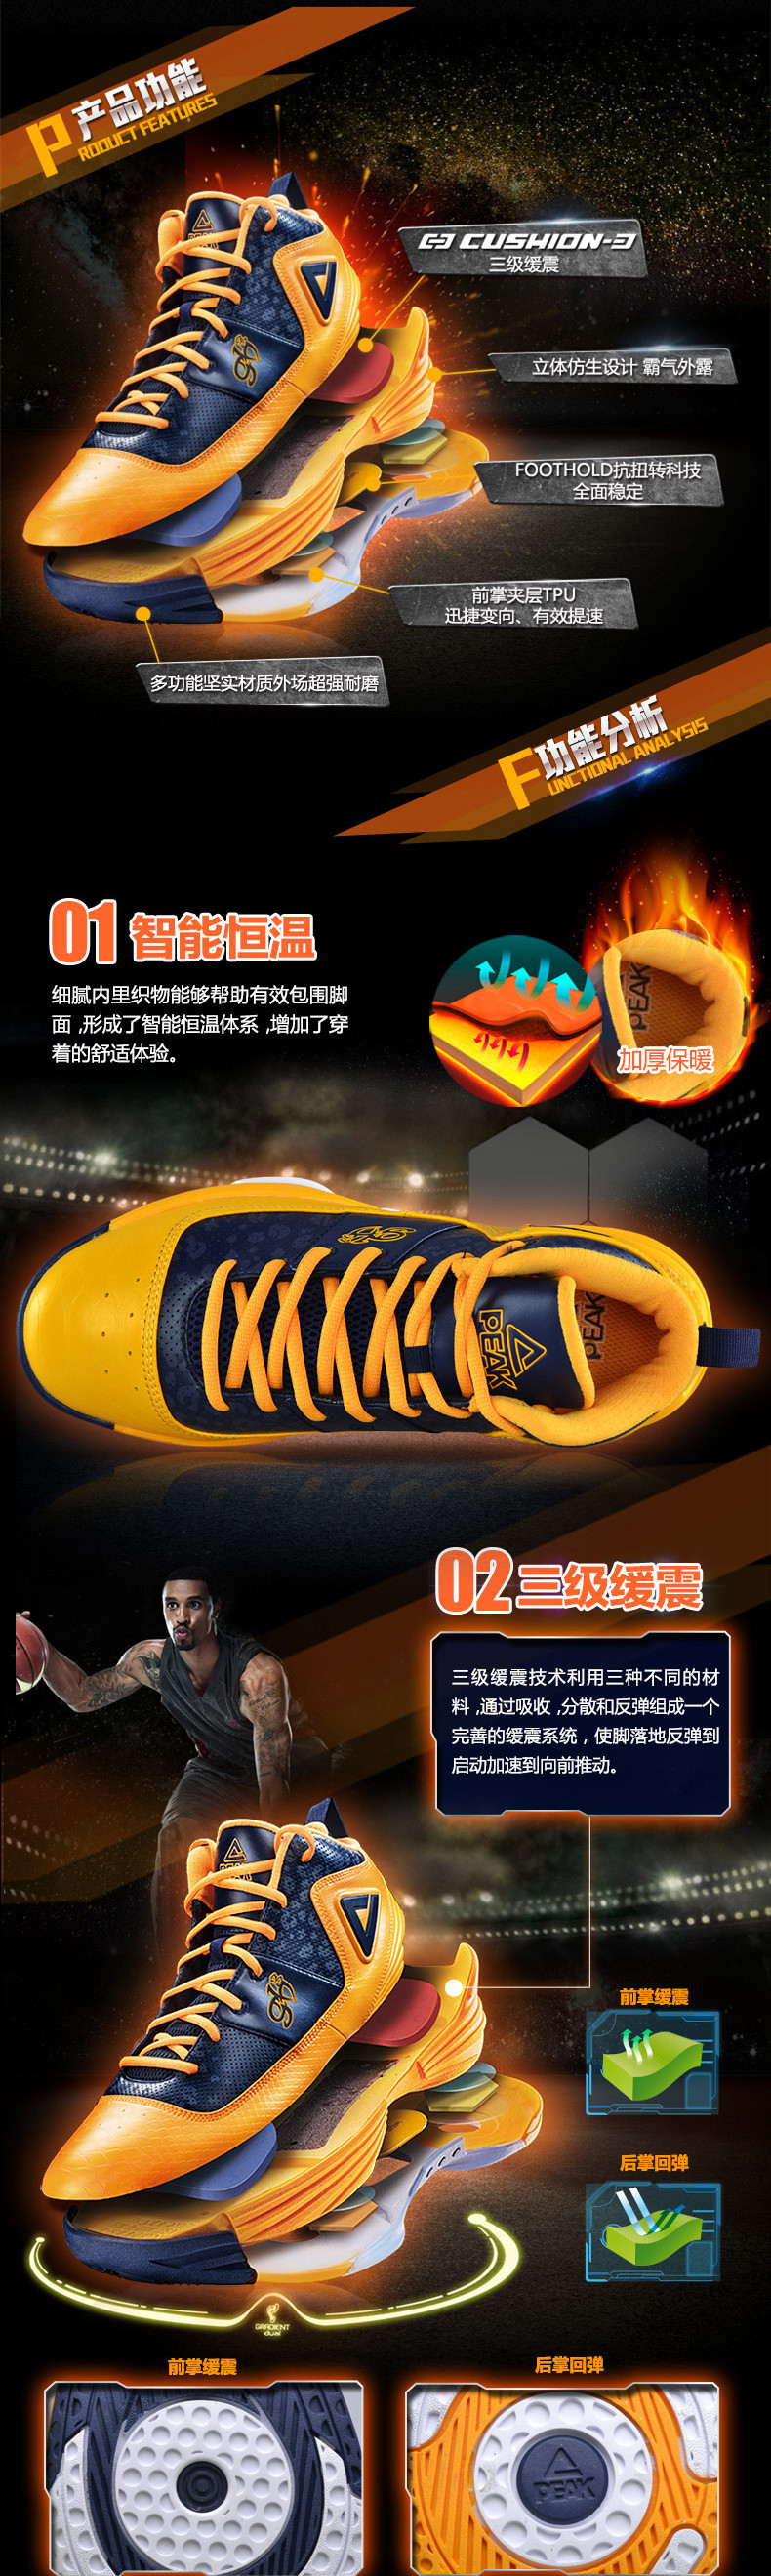 Peak GH3 George Hill Indiana Pacers Basketball Shoes